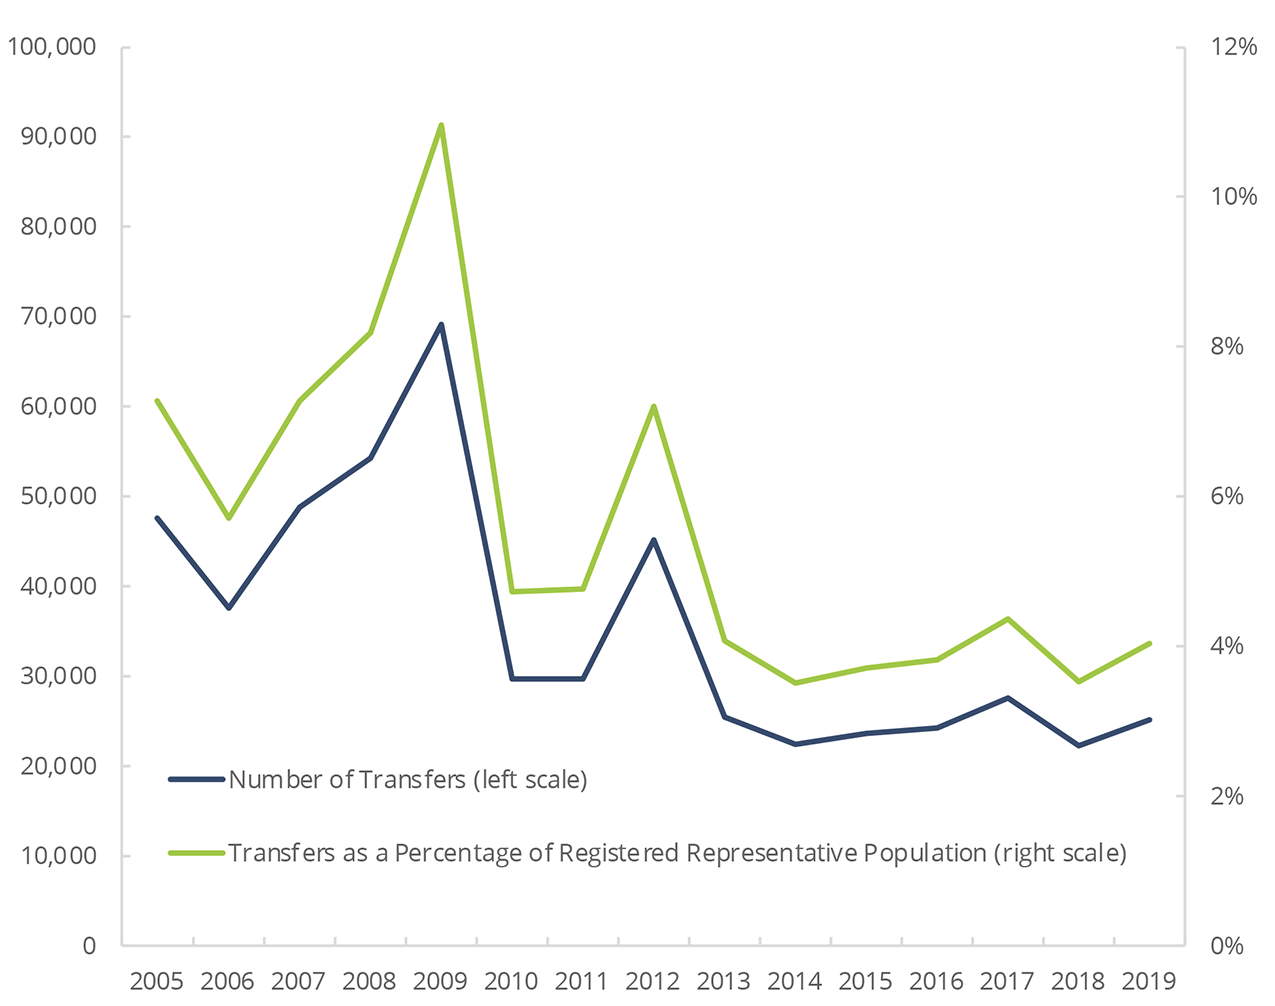 FINRA-Registered Representatives’ Transfers Between Firms within the Industry, 2004—2018 